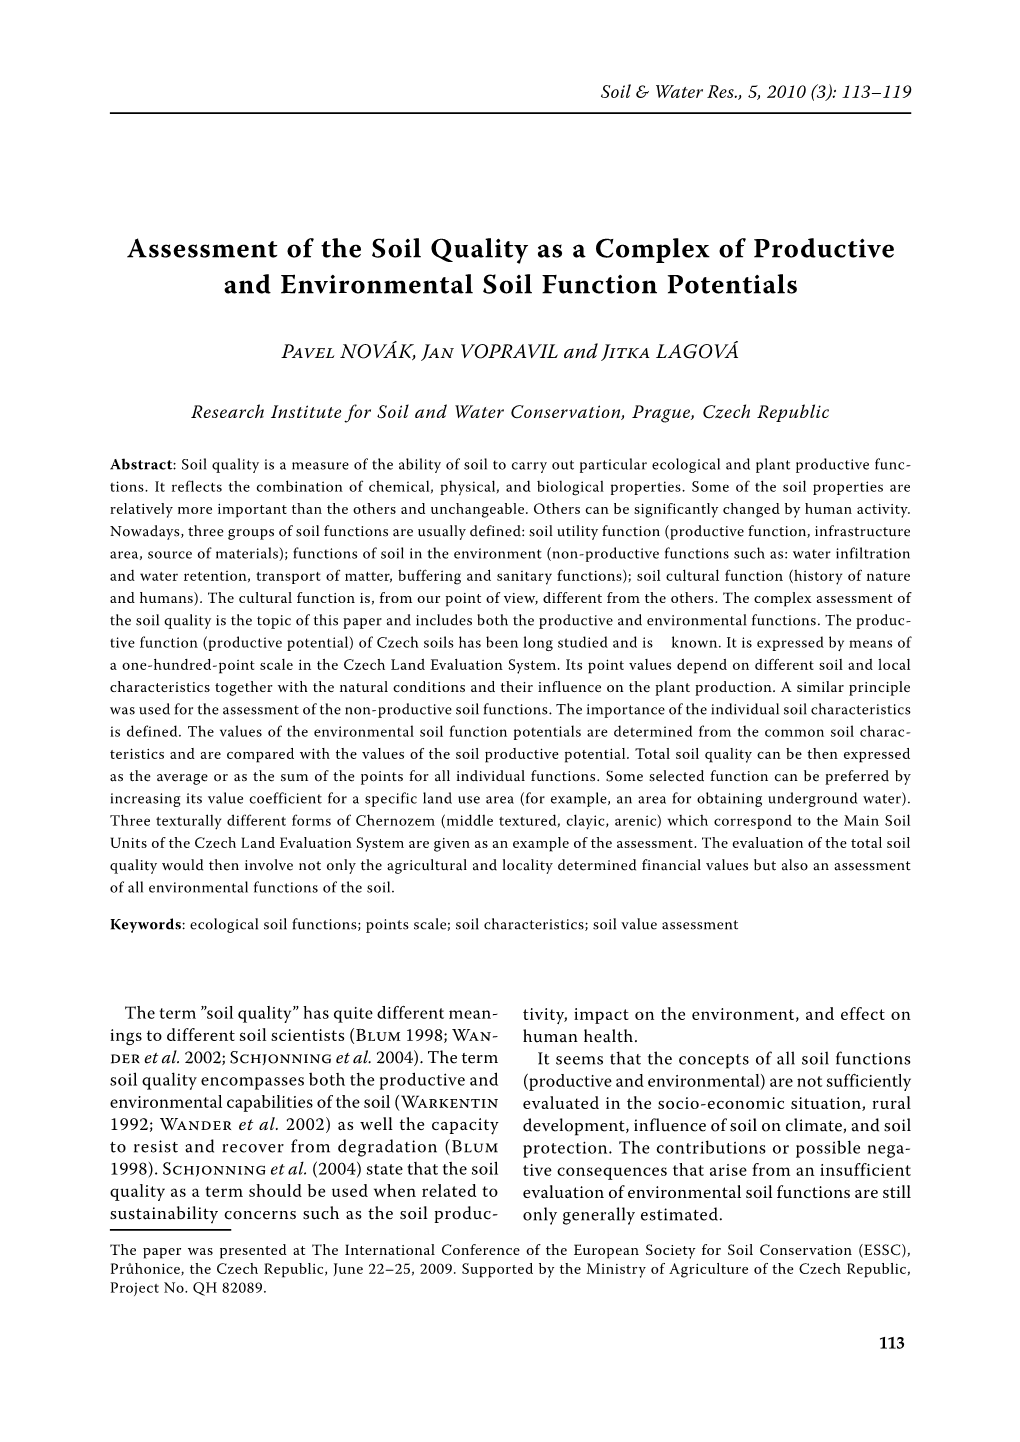 Assessment of the Soil Quality As a Complex of Productive and Environmental Soil Function Potentials